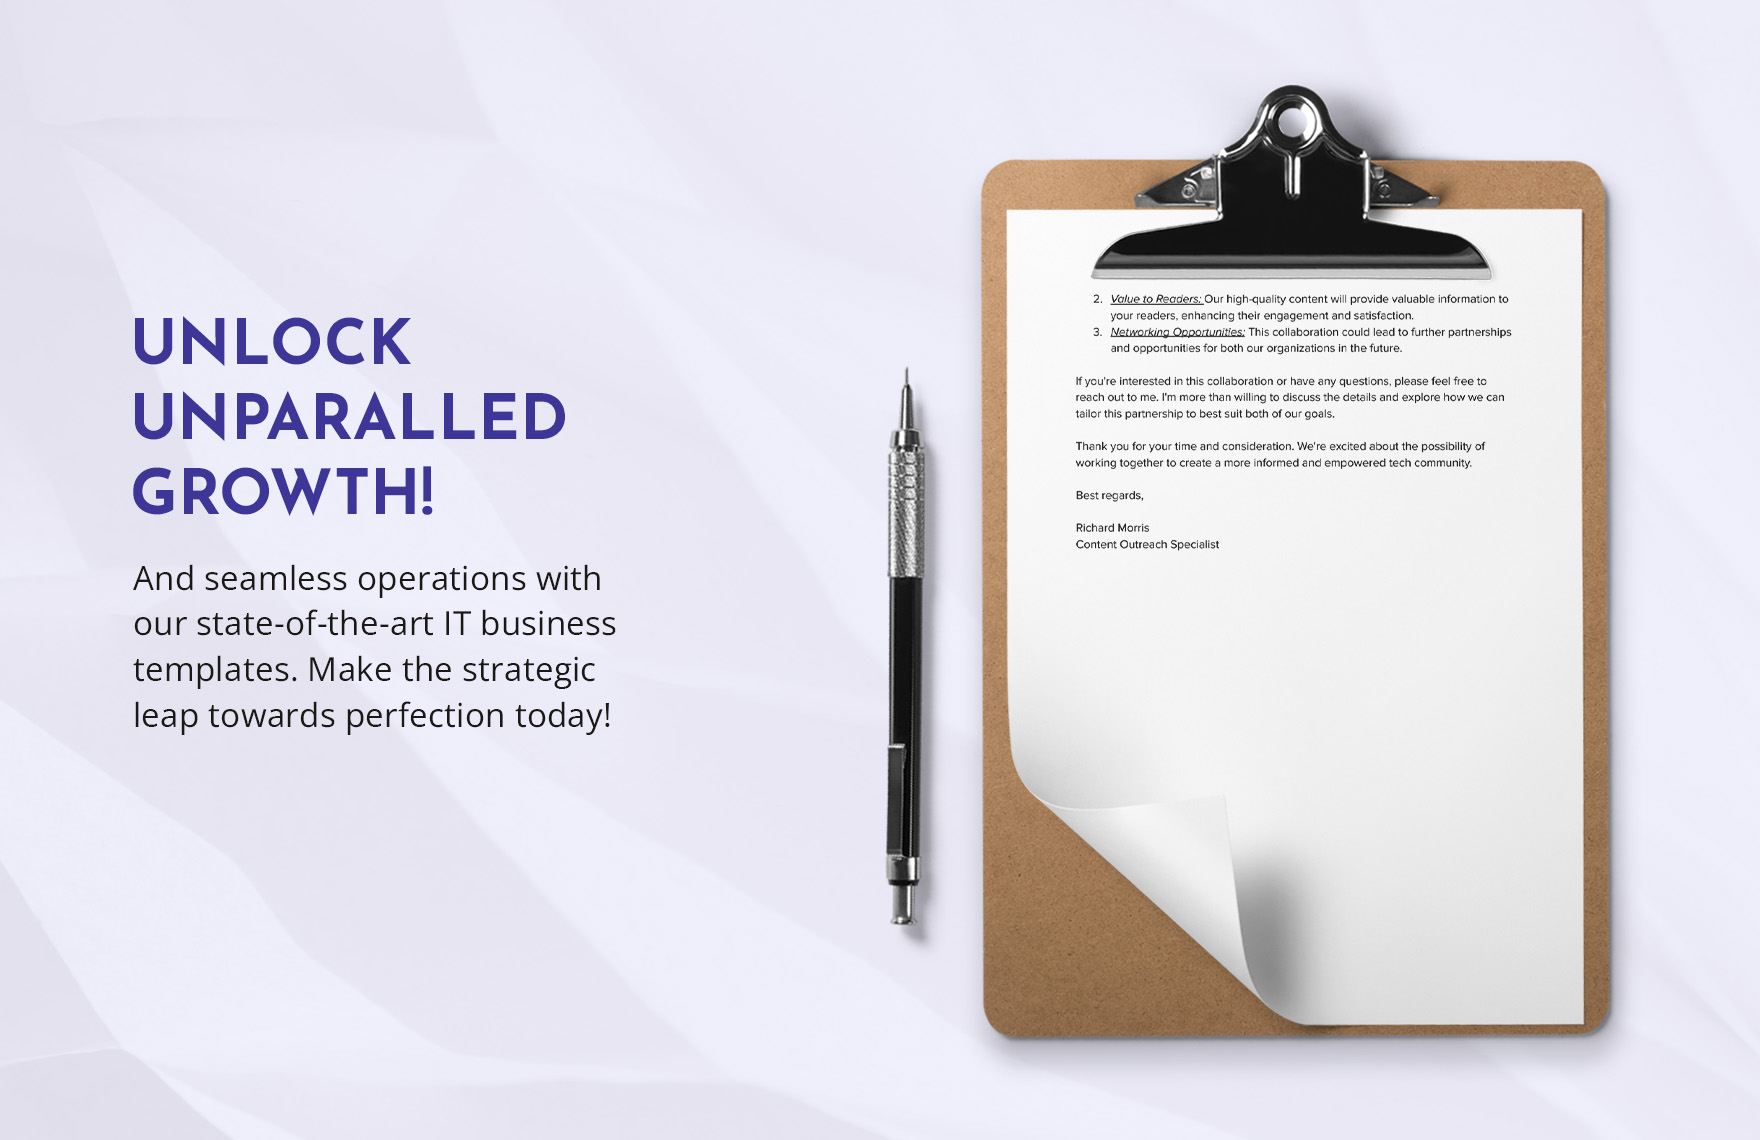 Backlink Outreach Letter Template